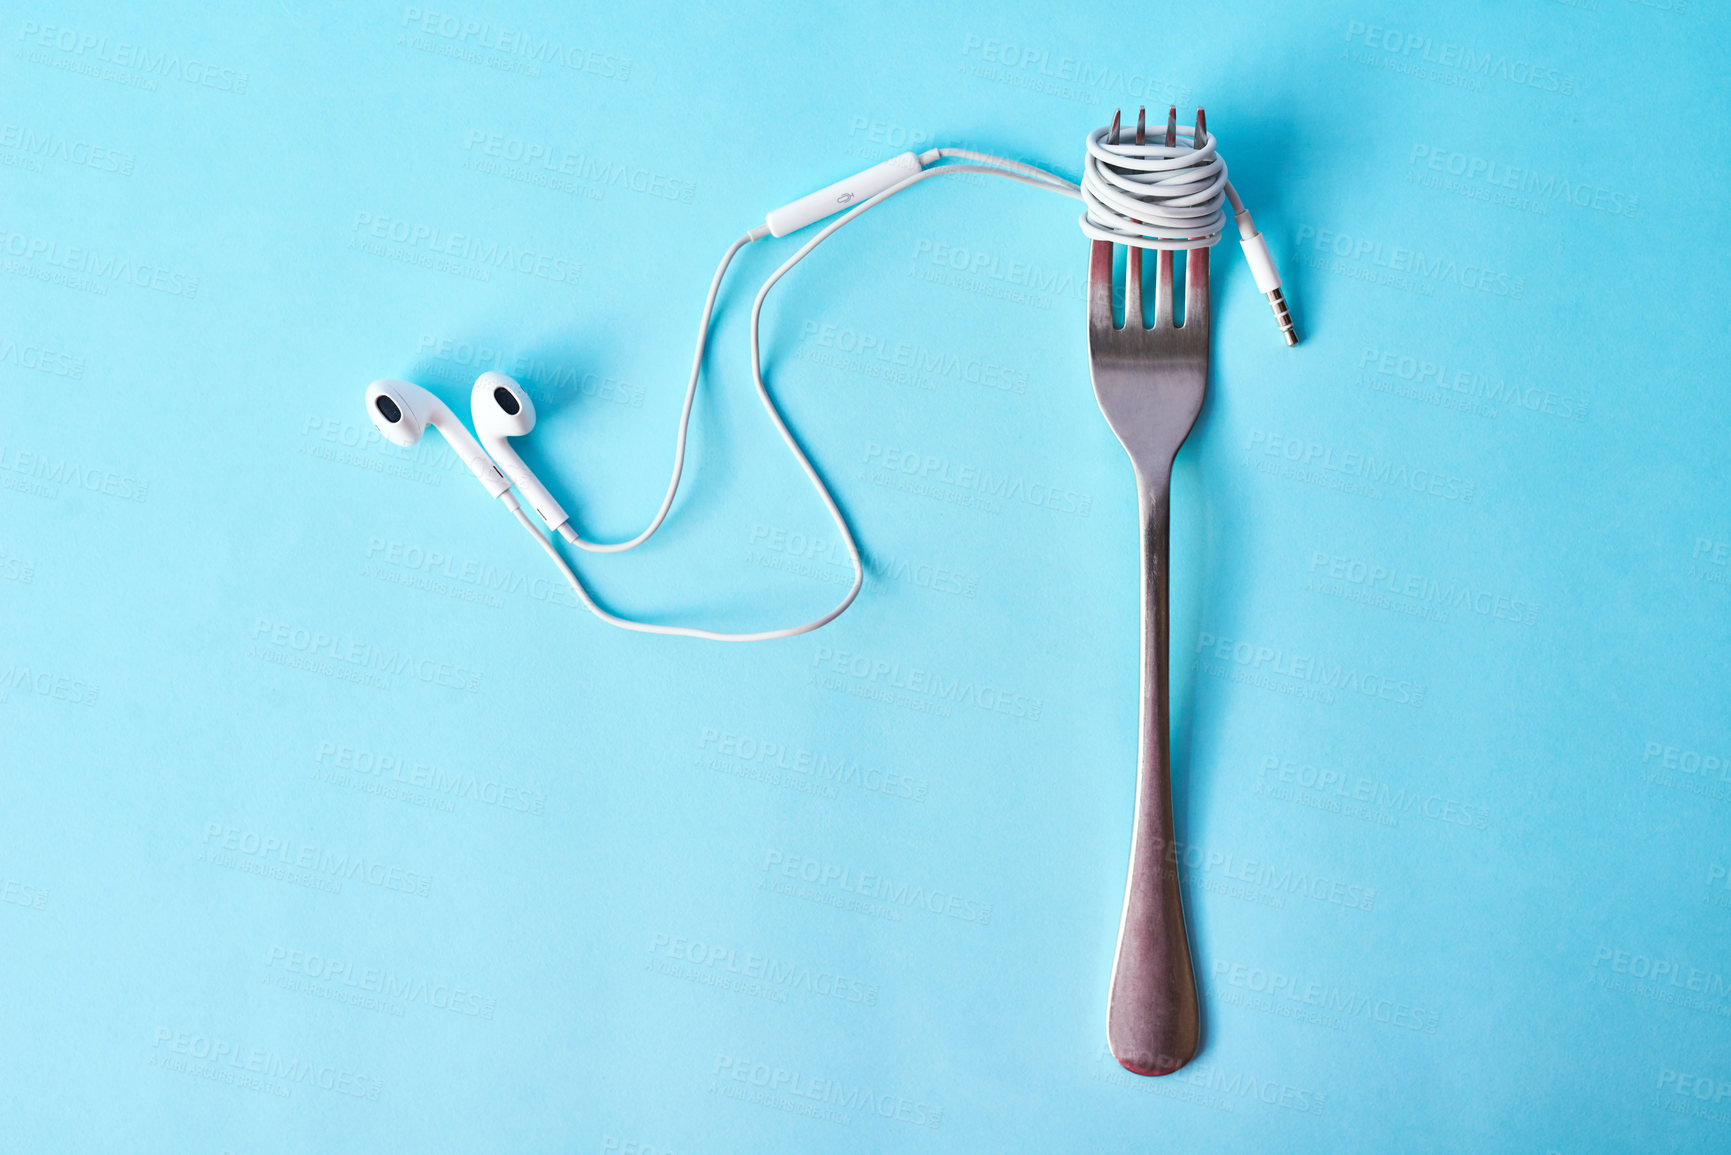 Buy stock photo Studio shot of earphones wrapped around a fork against a blue background